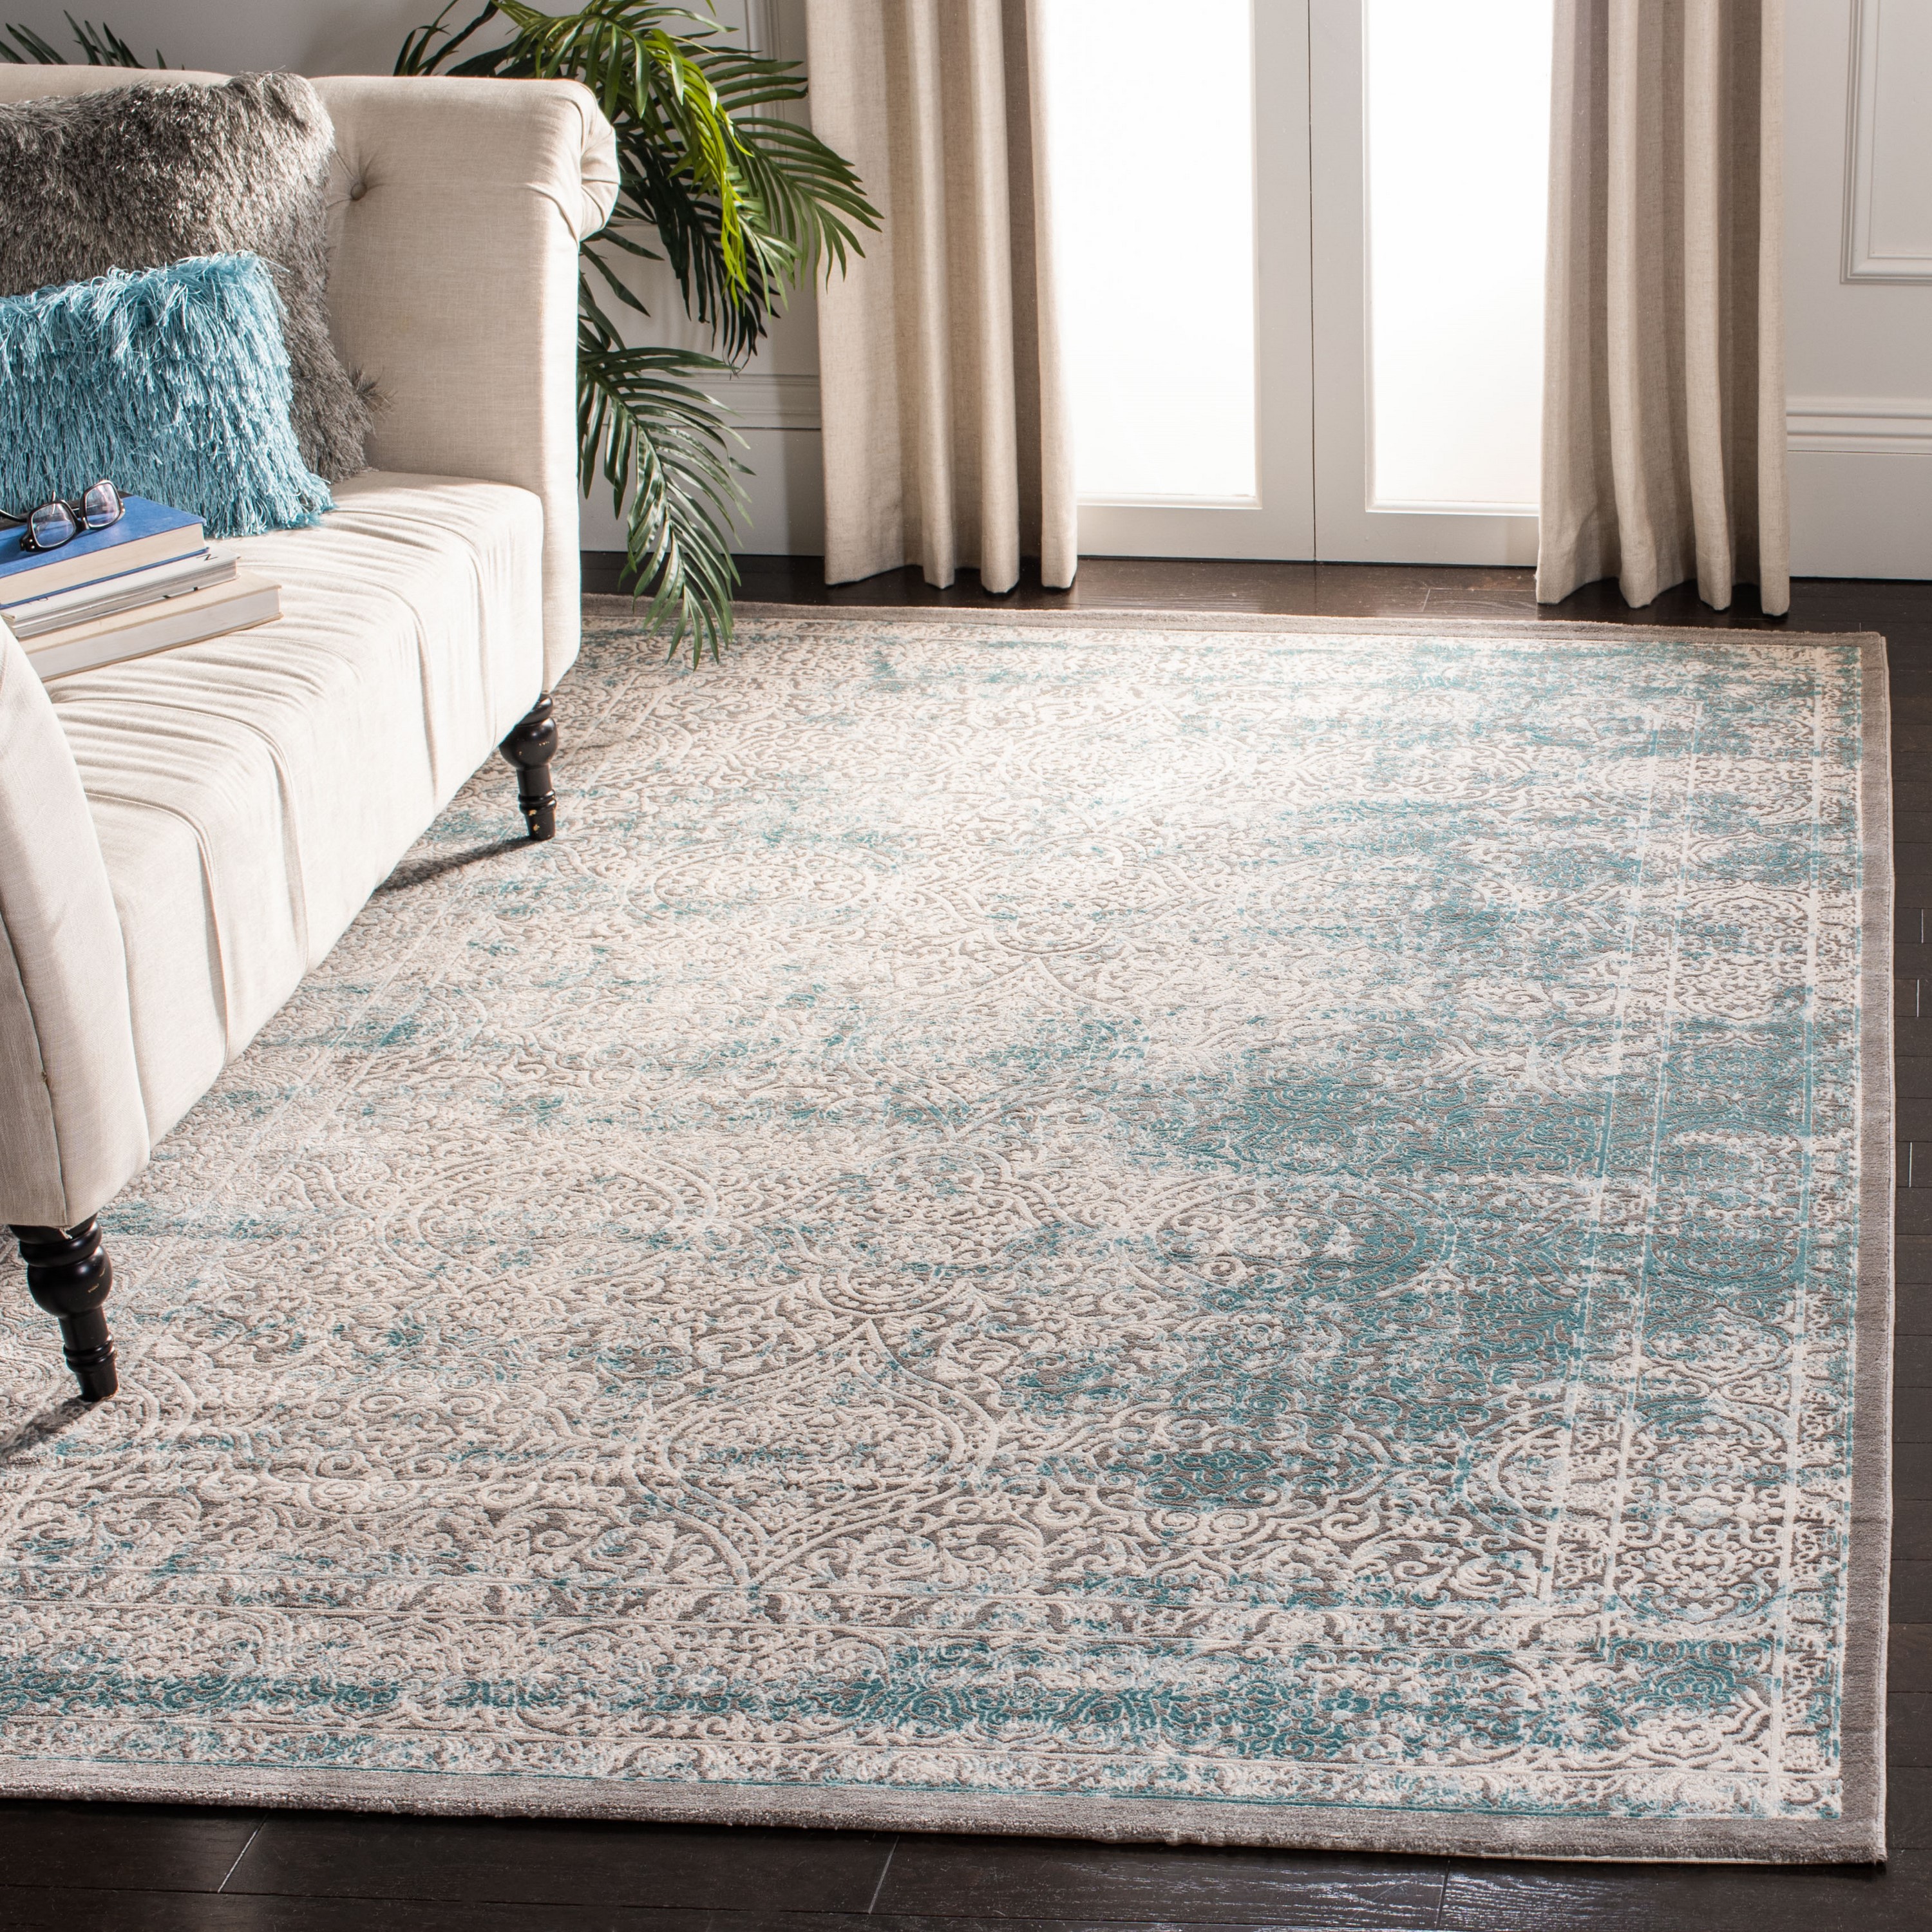 Safavieh 12 x 18 Turquoise/Ivory Indoor Abstract Vintage Area Rug in ...